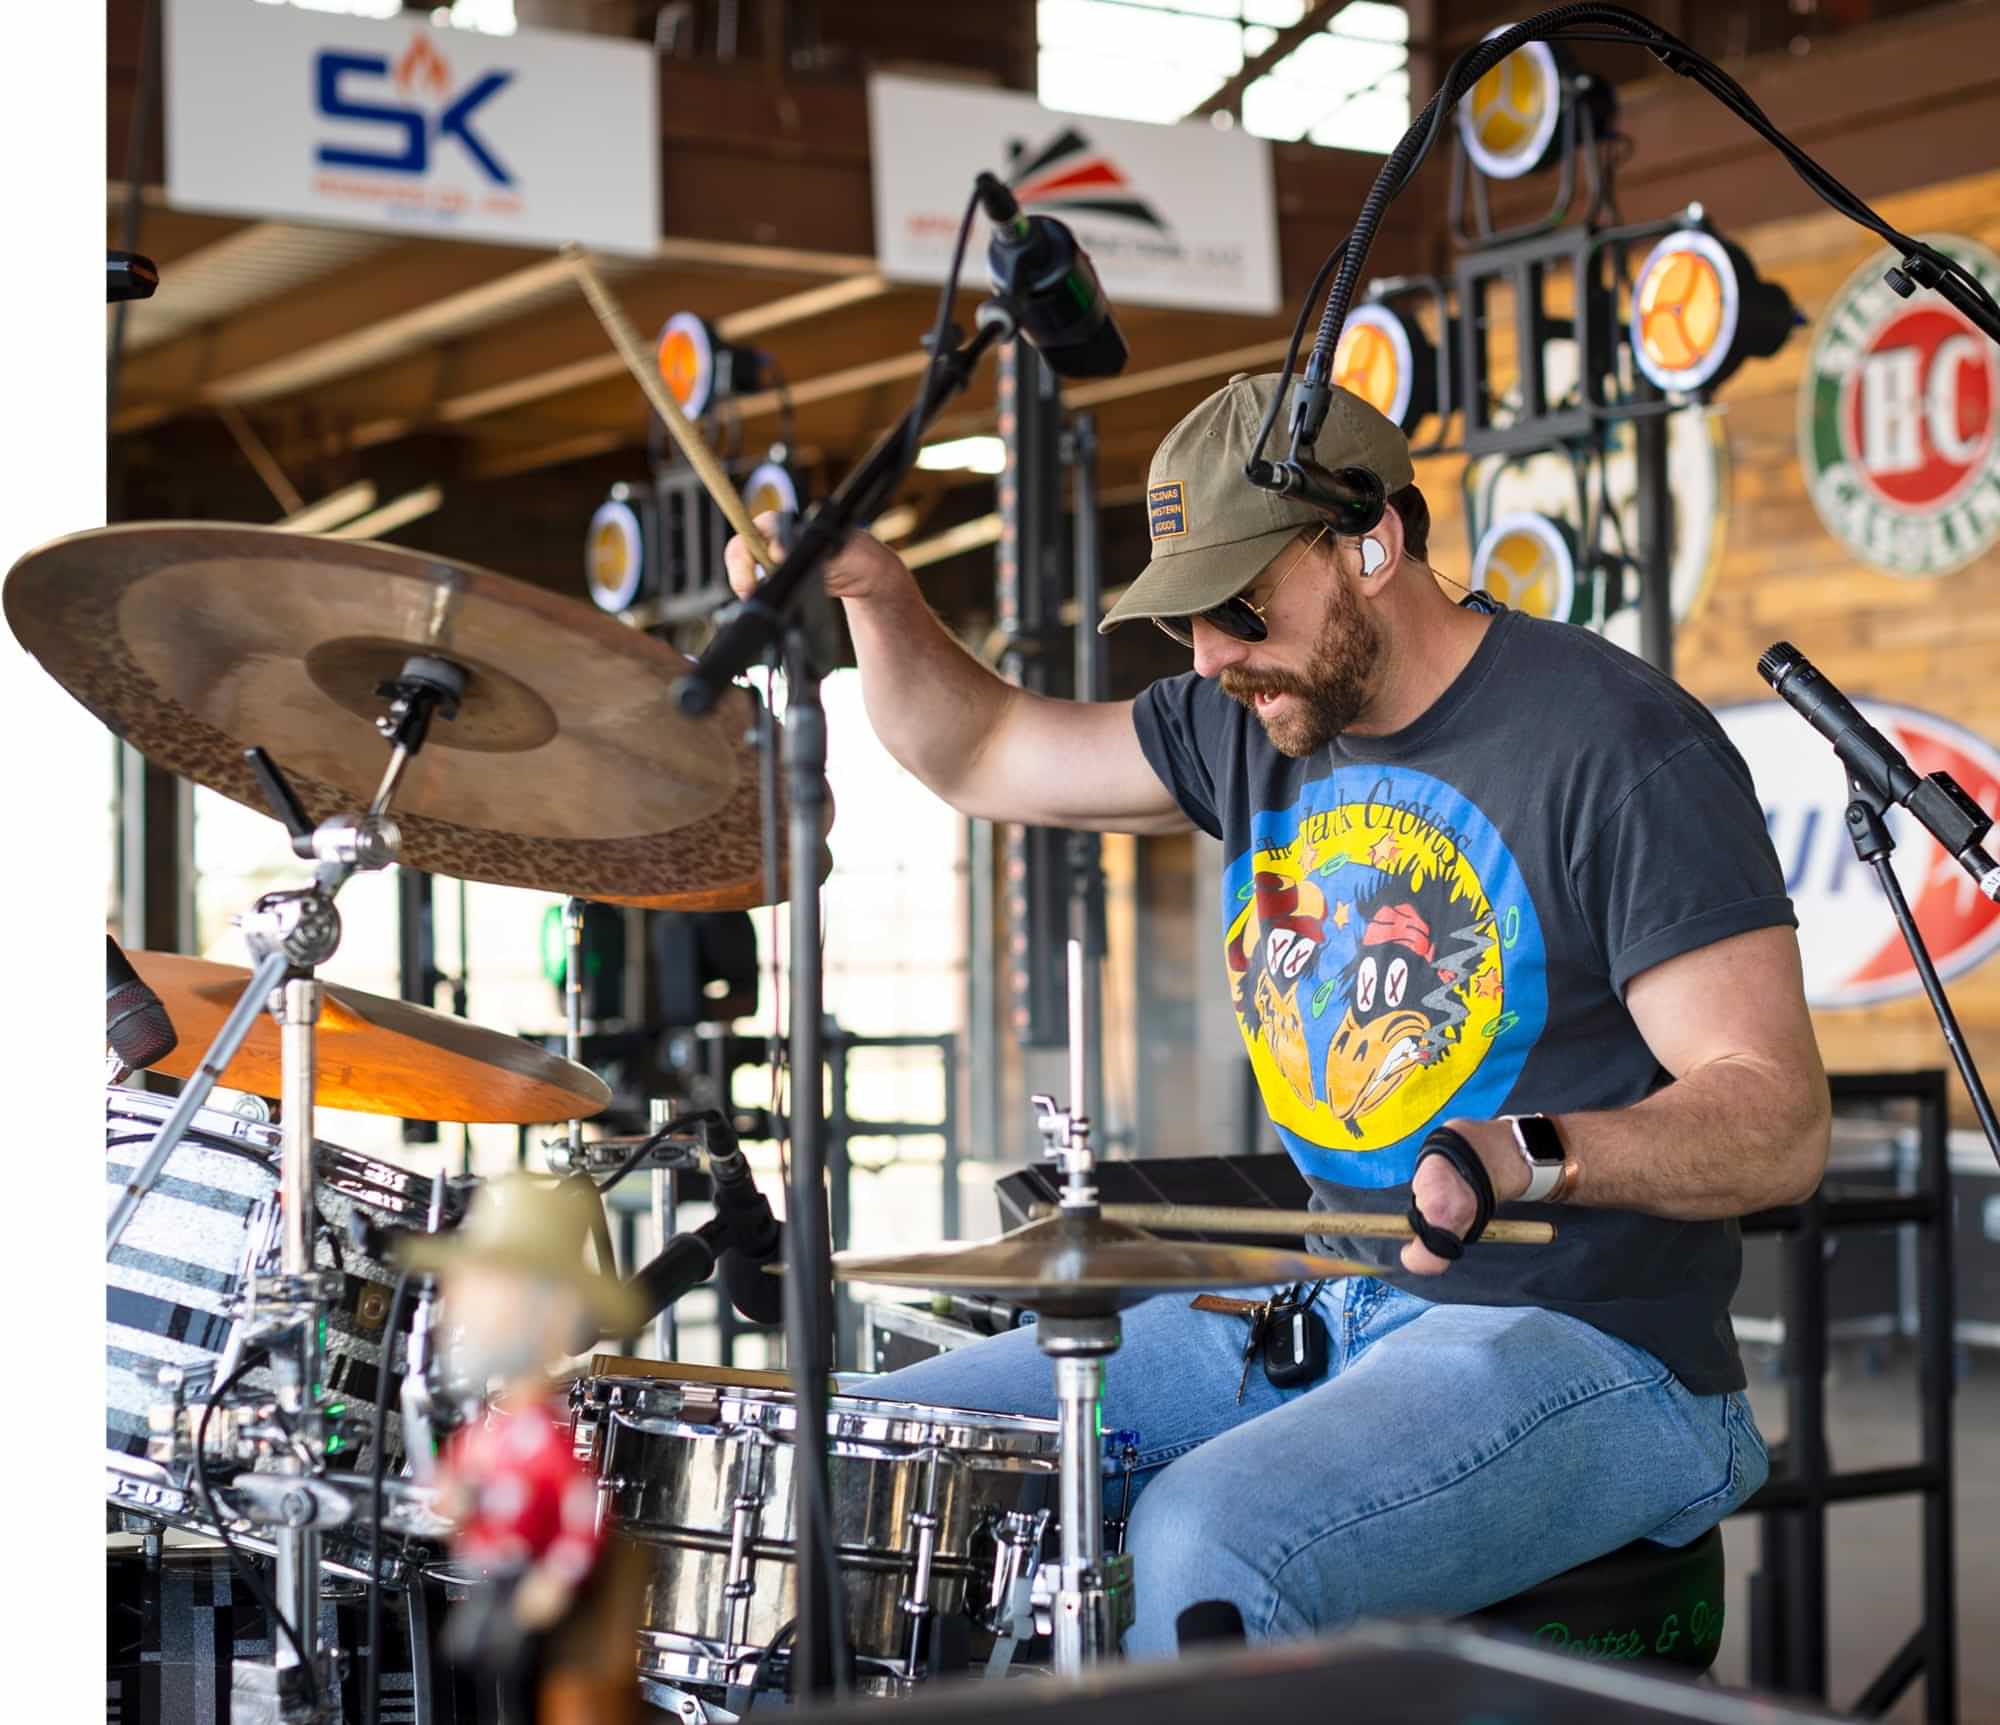 close up of Jason Albers performing drums on a stage wearing sunglasses, a green cap, a graphic t-shirt and jeans